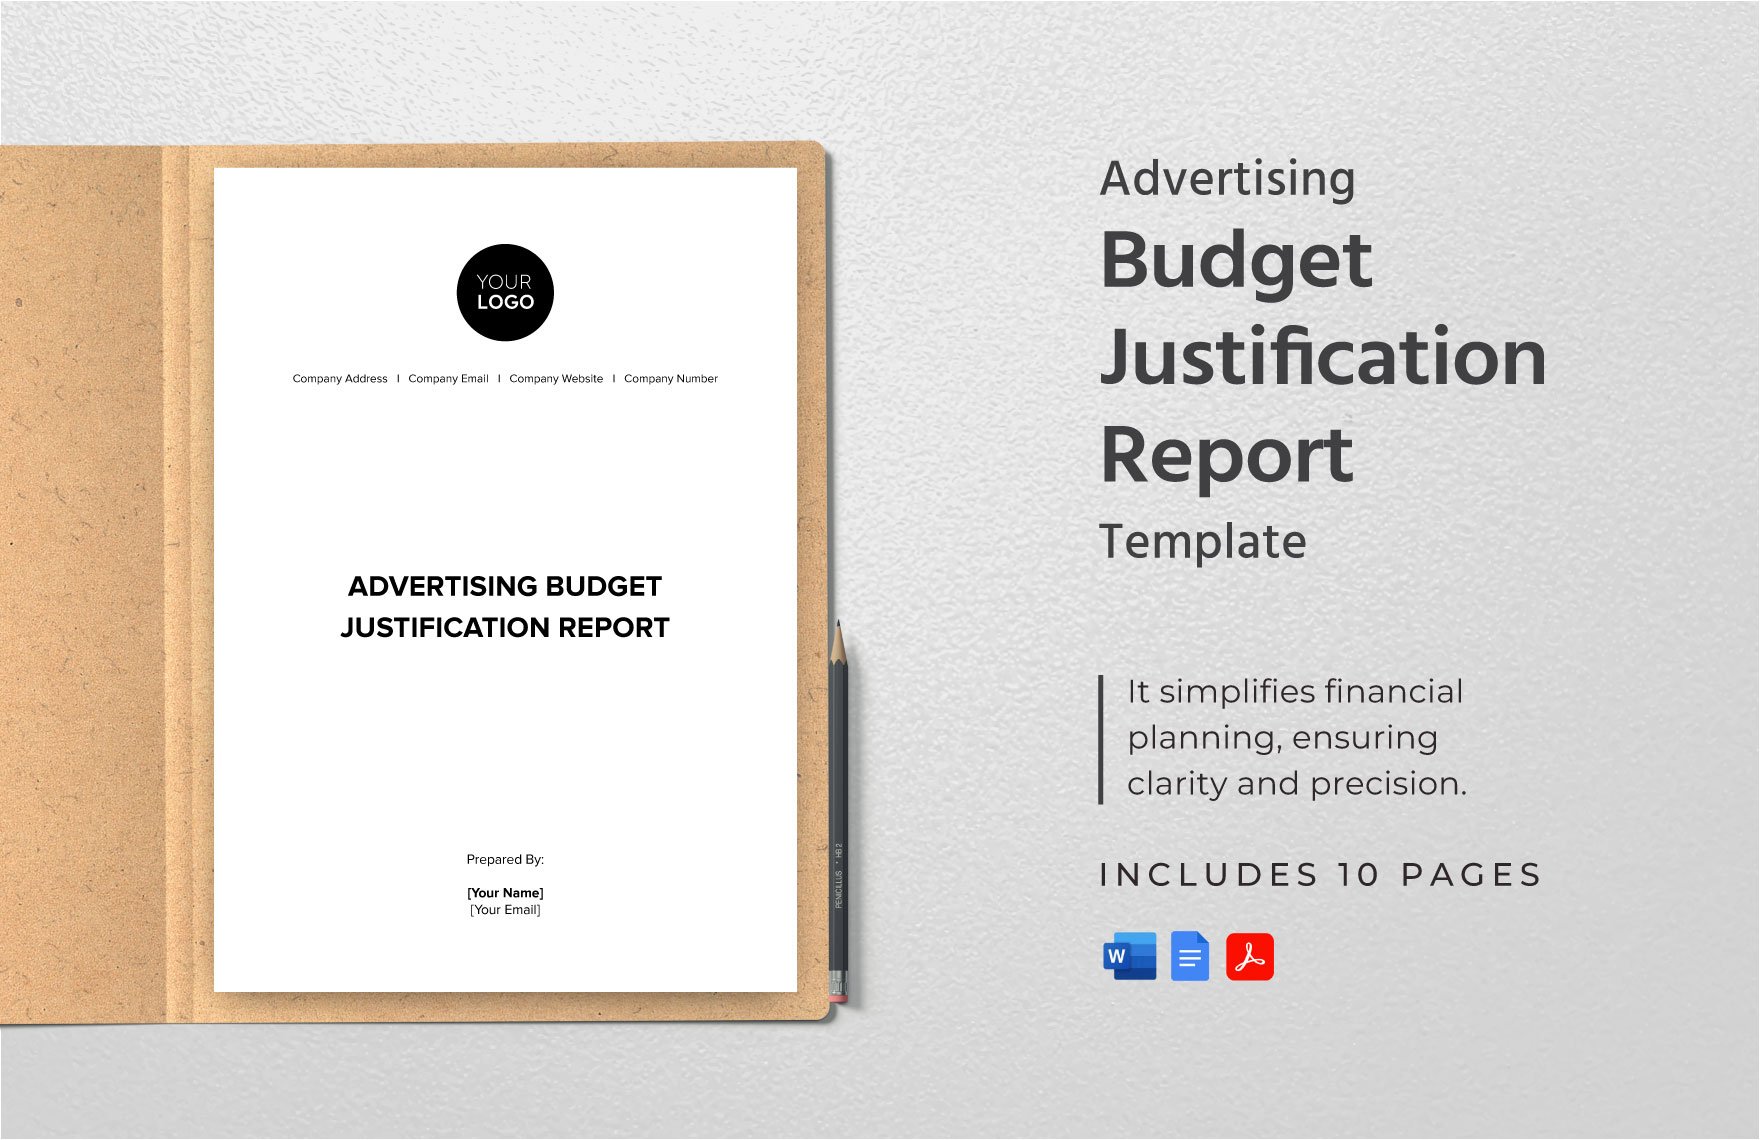 Advertising Budget Justification Report Template